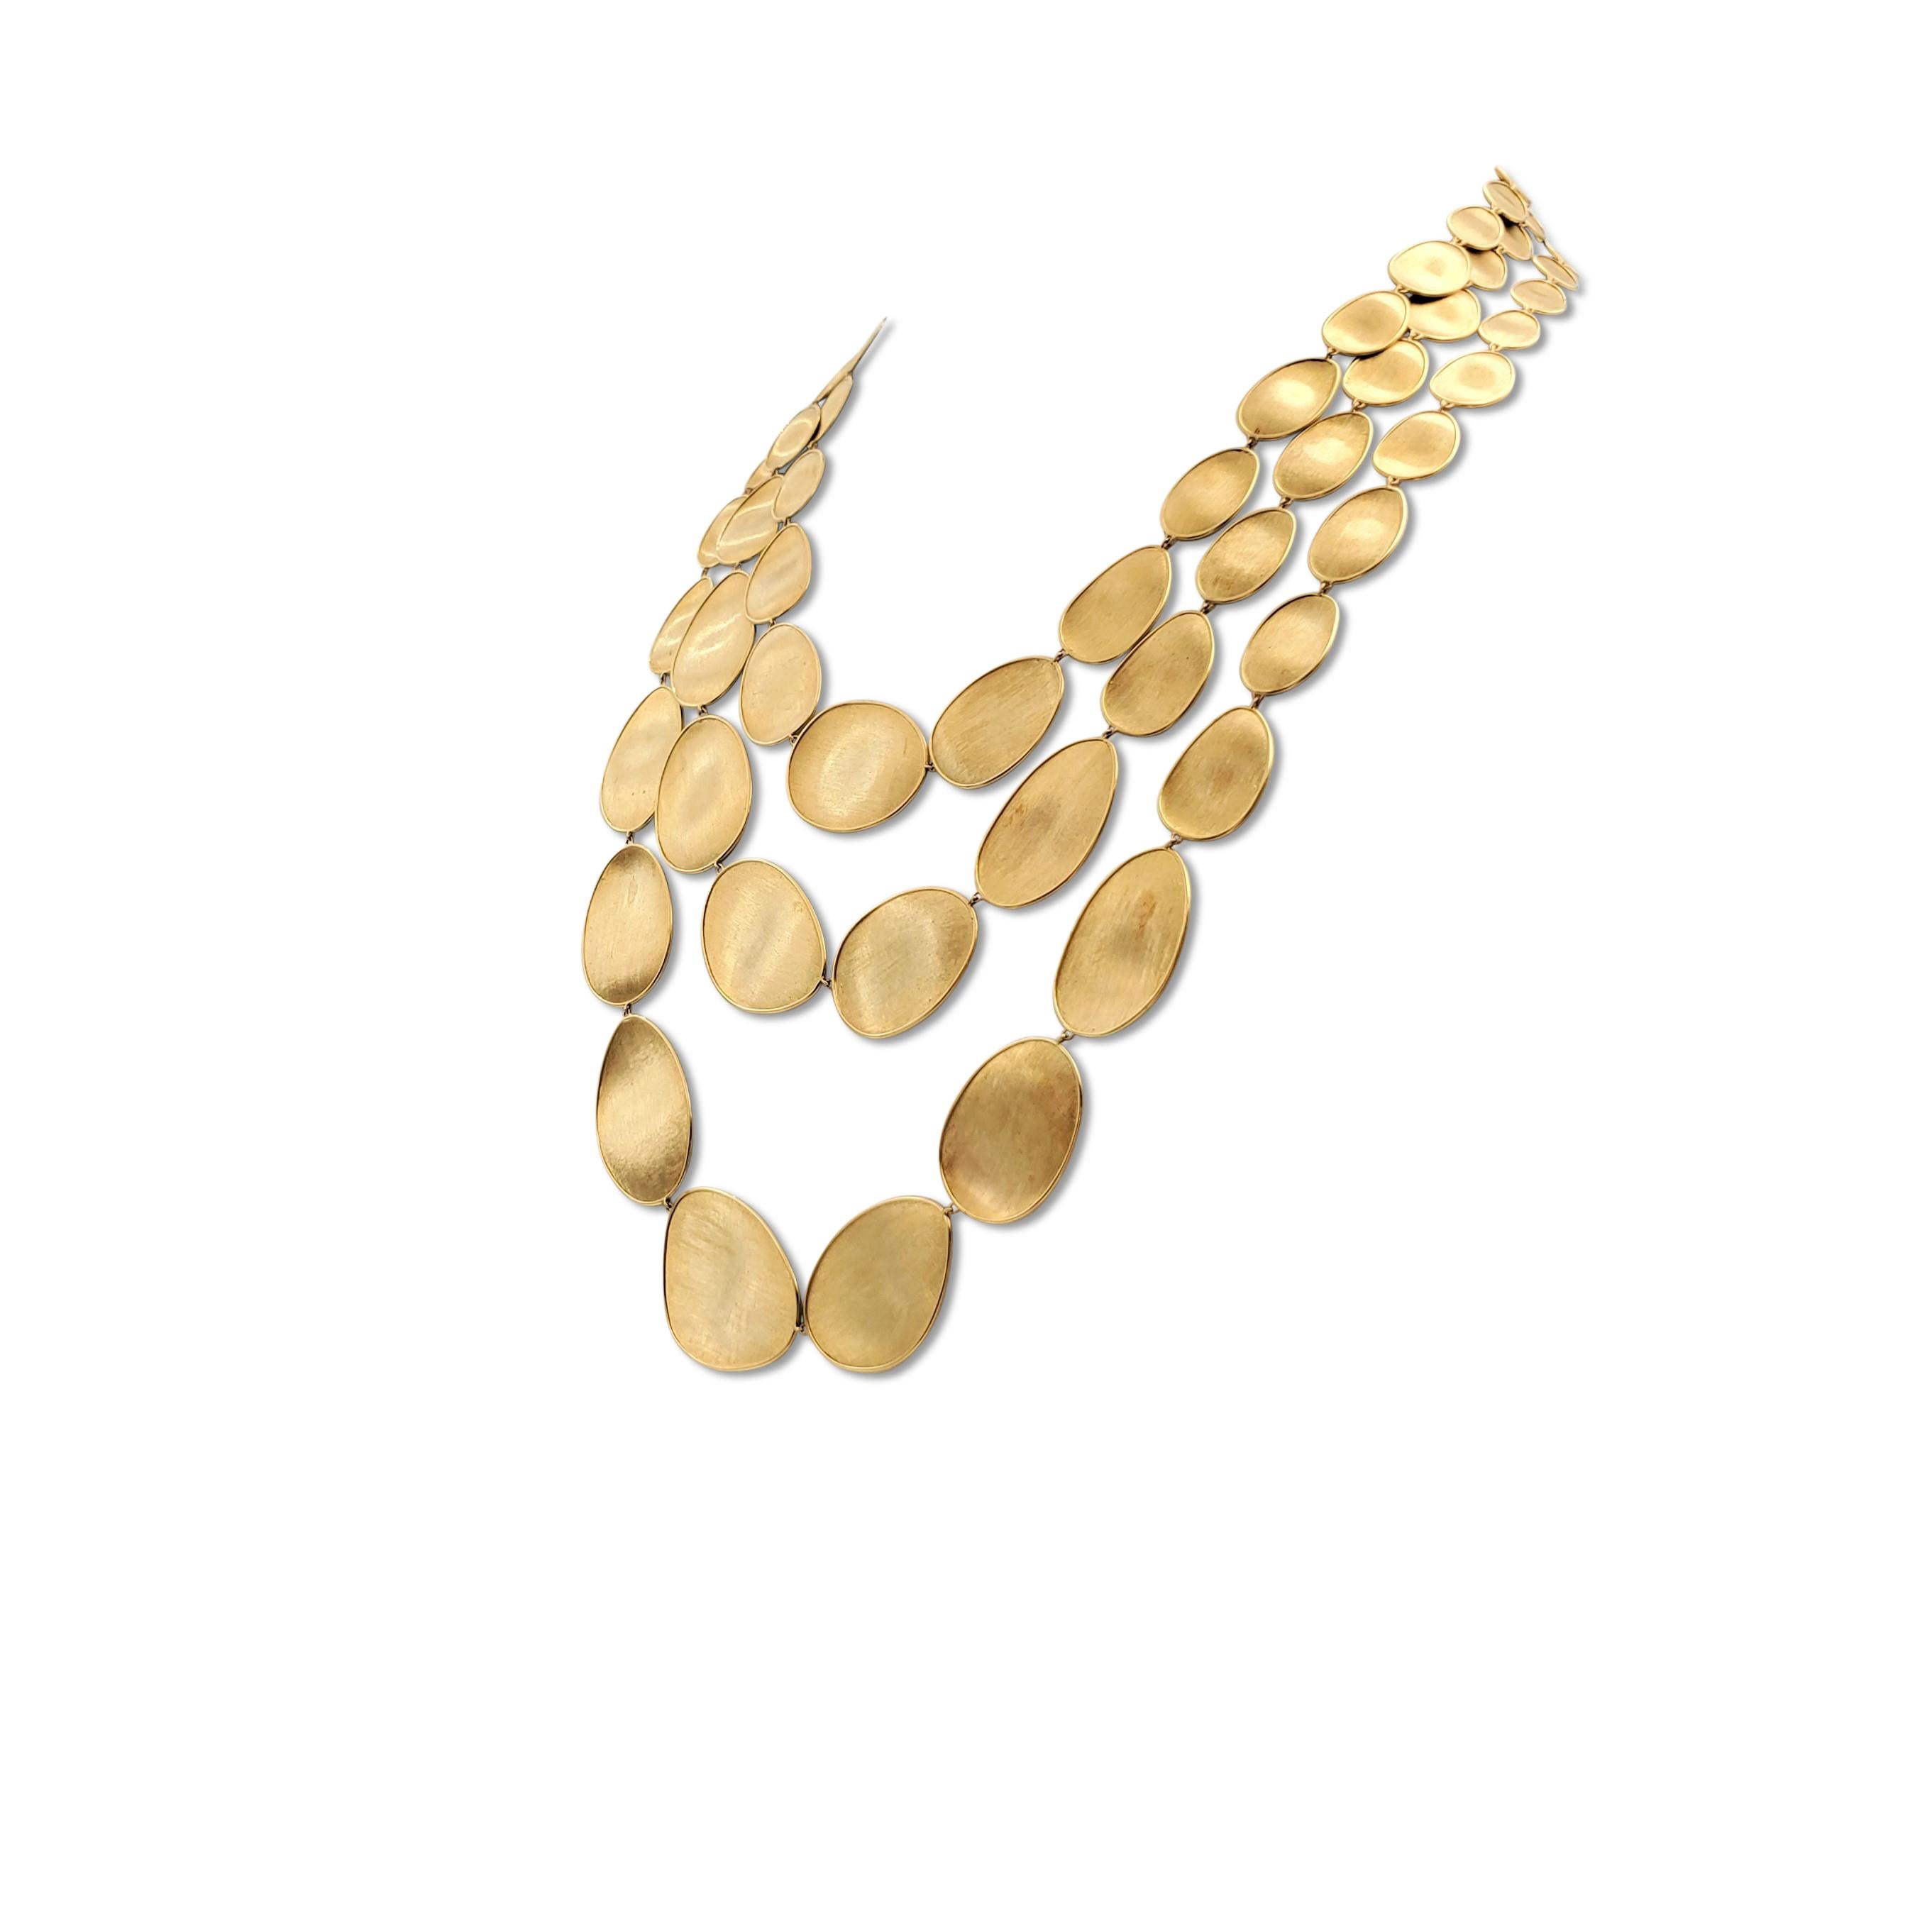 Authentic Marco Bicego 'Lunaria' necklace centers on three 18 karat yellow gold strands of free-form oval-shaped links featuring the house's signature Bulino hand engraving technique, giving the piece a brushed appearance. Signed Marco Bicego, Made